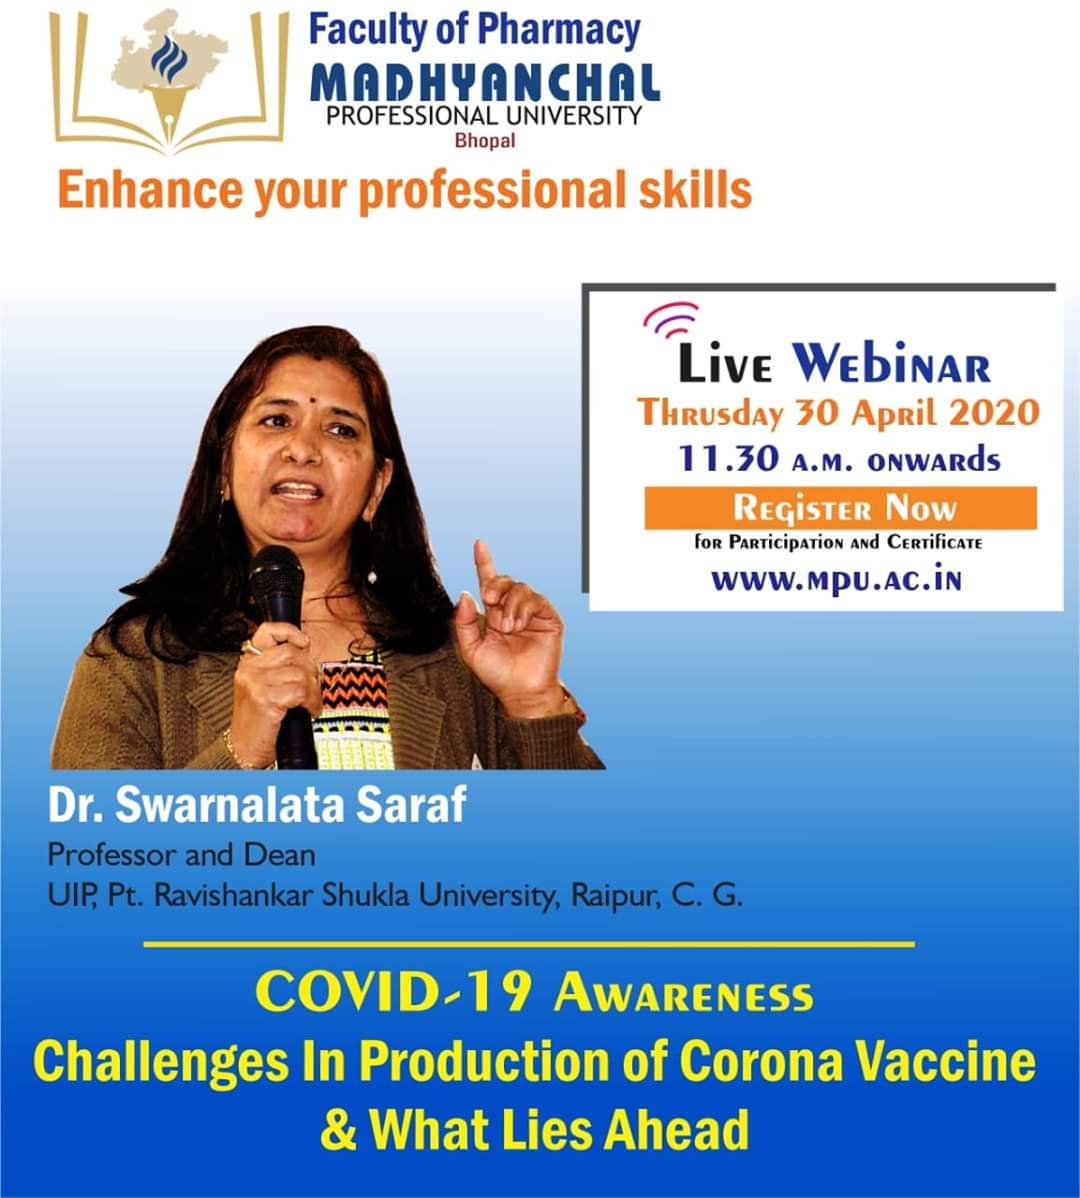  COVID-19 Awareness Challenges in Production of Corona Vaccine & What Lies Ahead by Dr. Dr. Swarnalata Saraf